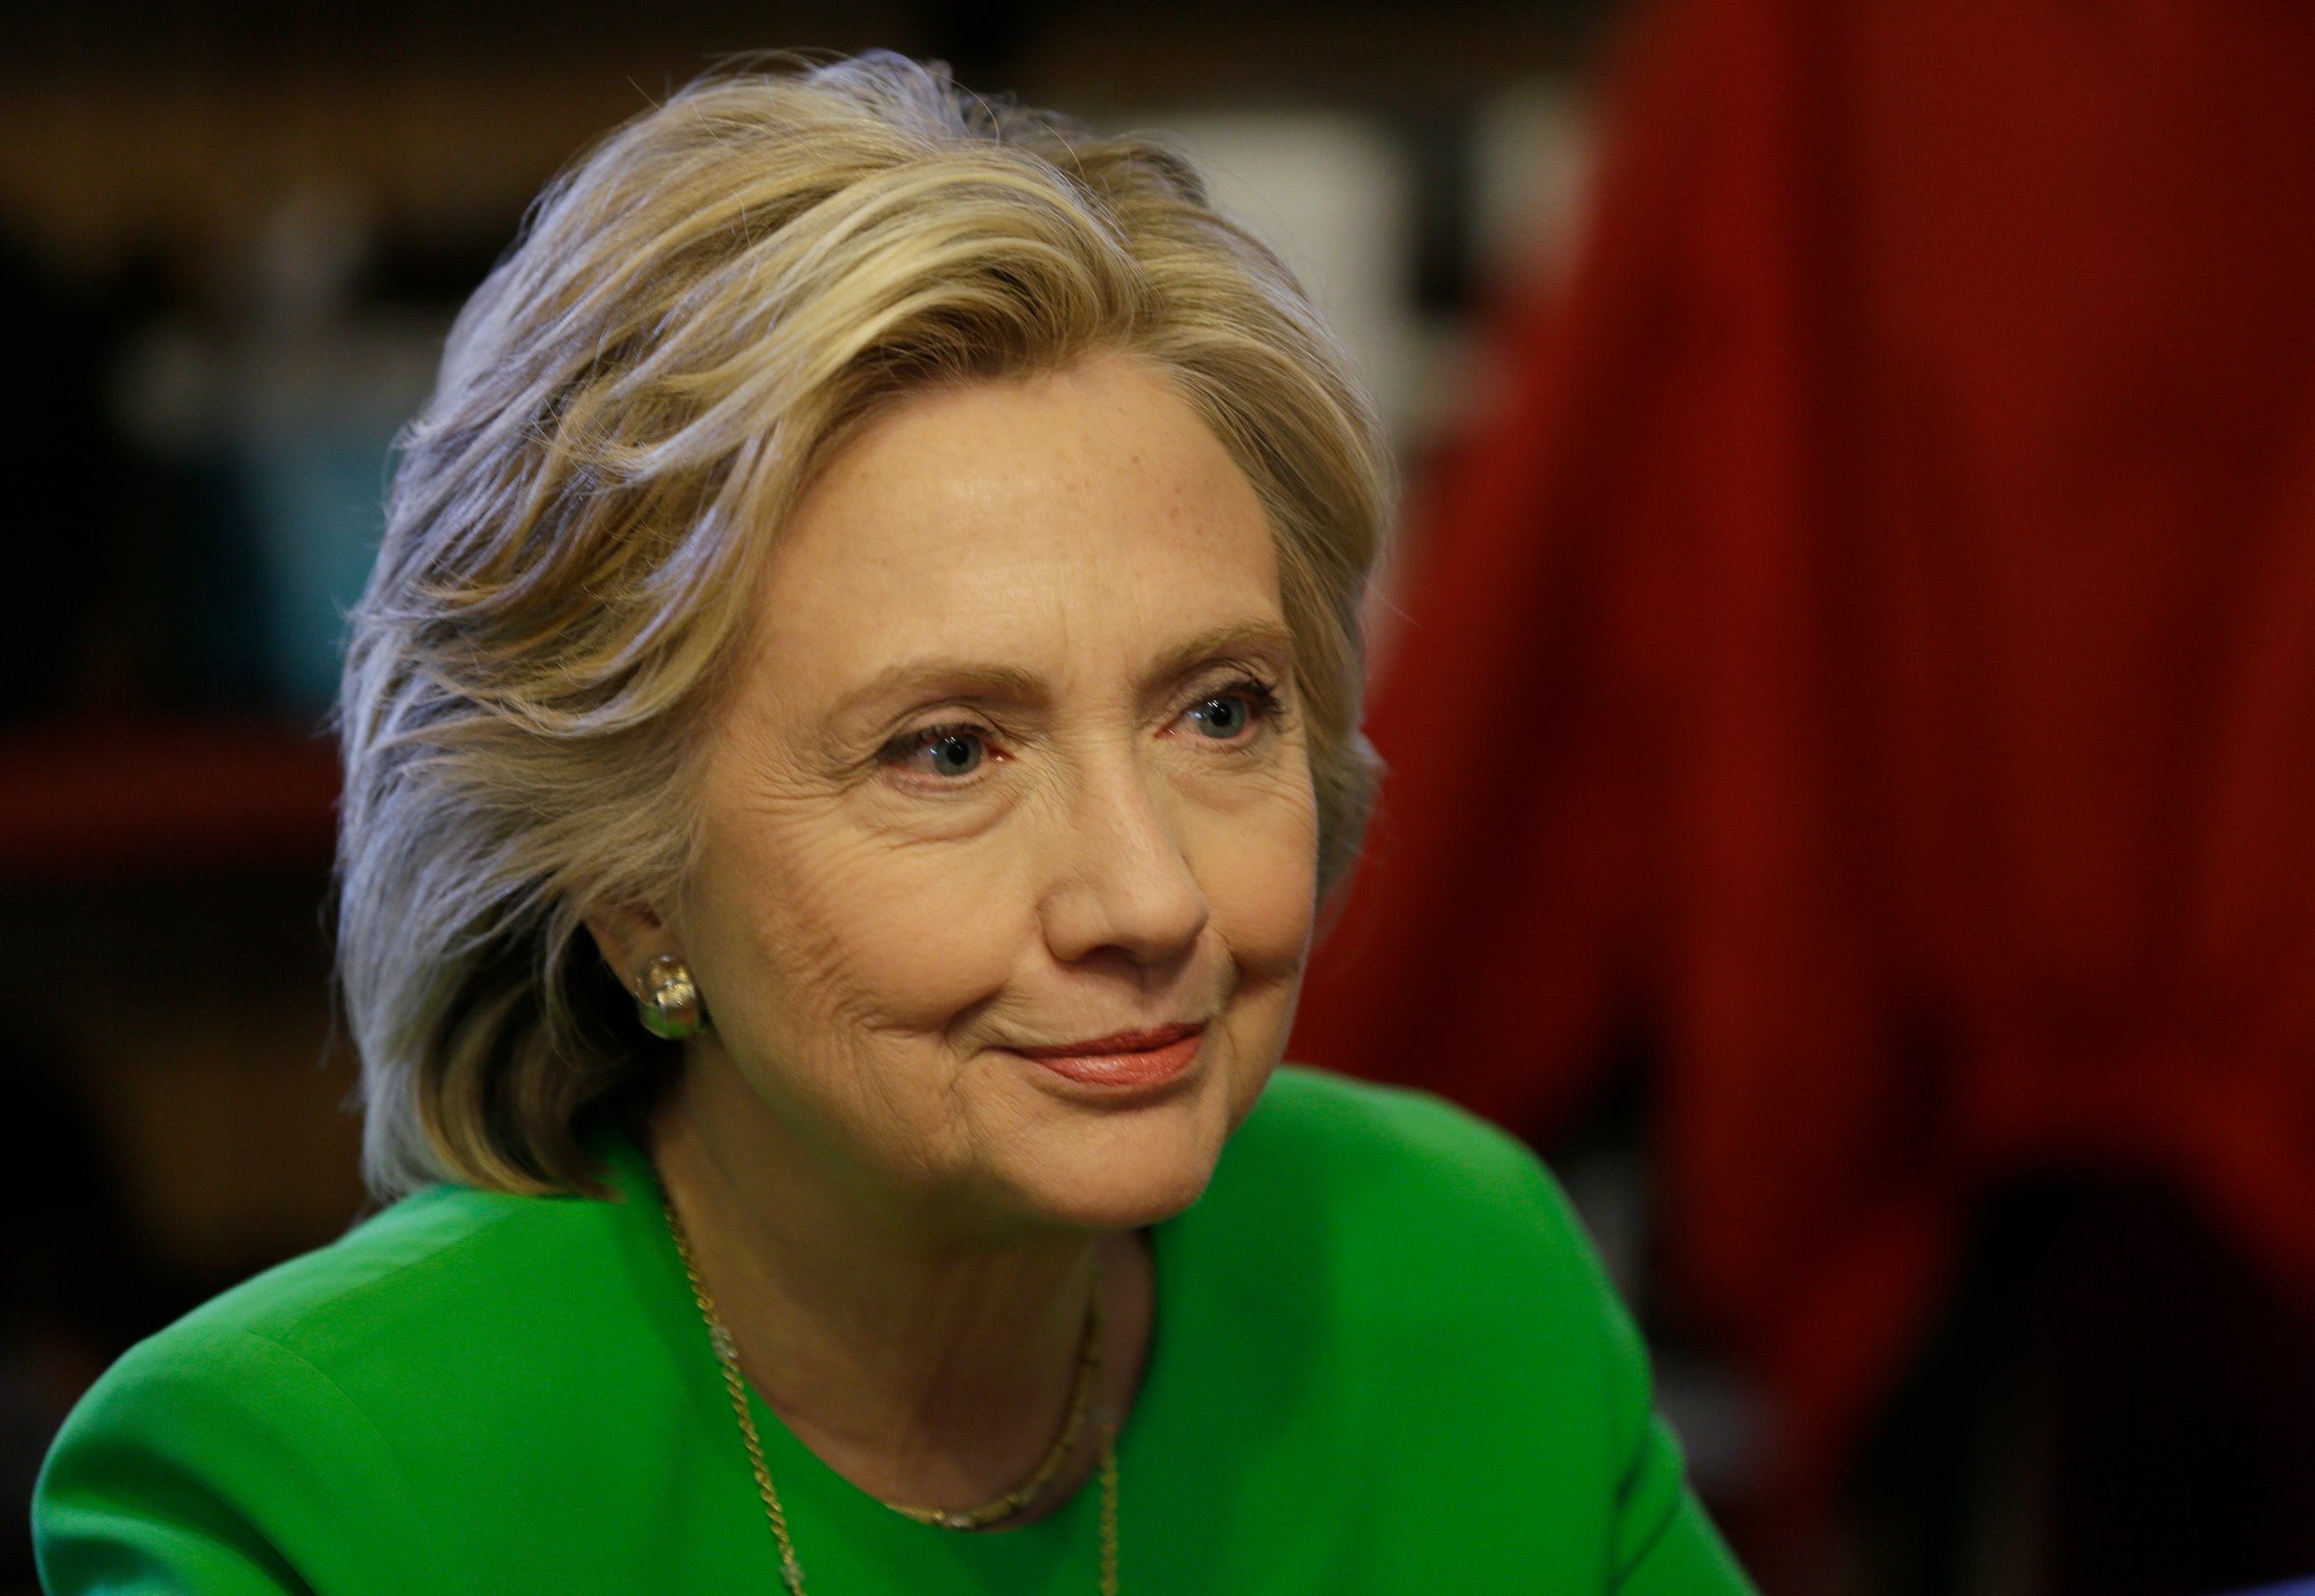 Hillary Rodham Clinton at a meeting in LeClaire, Iowa on April 14, 2015.